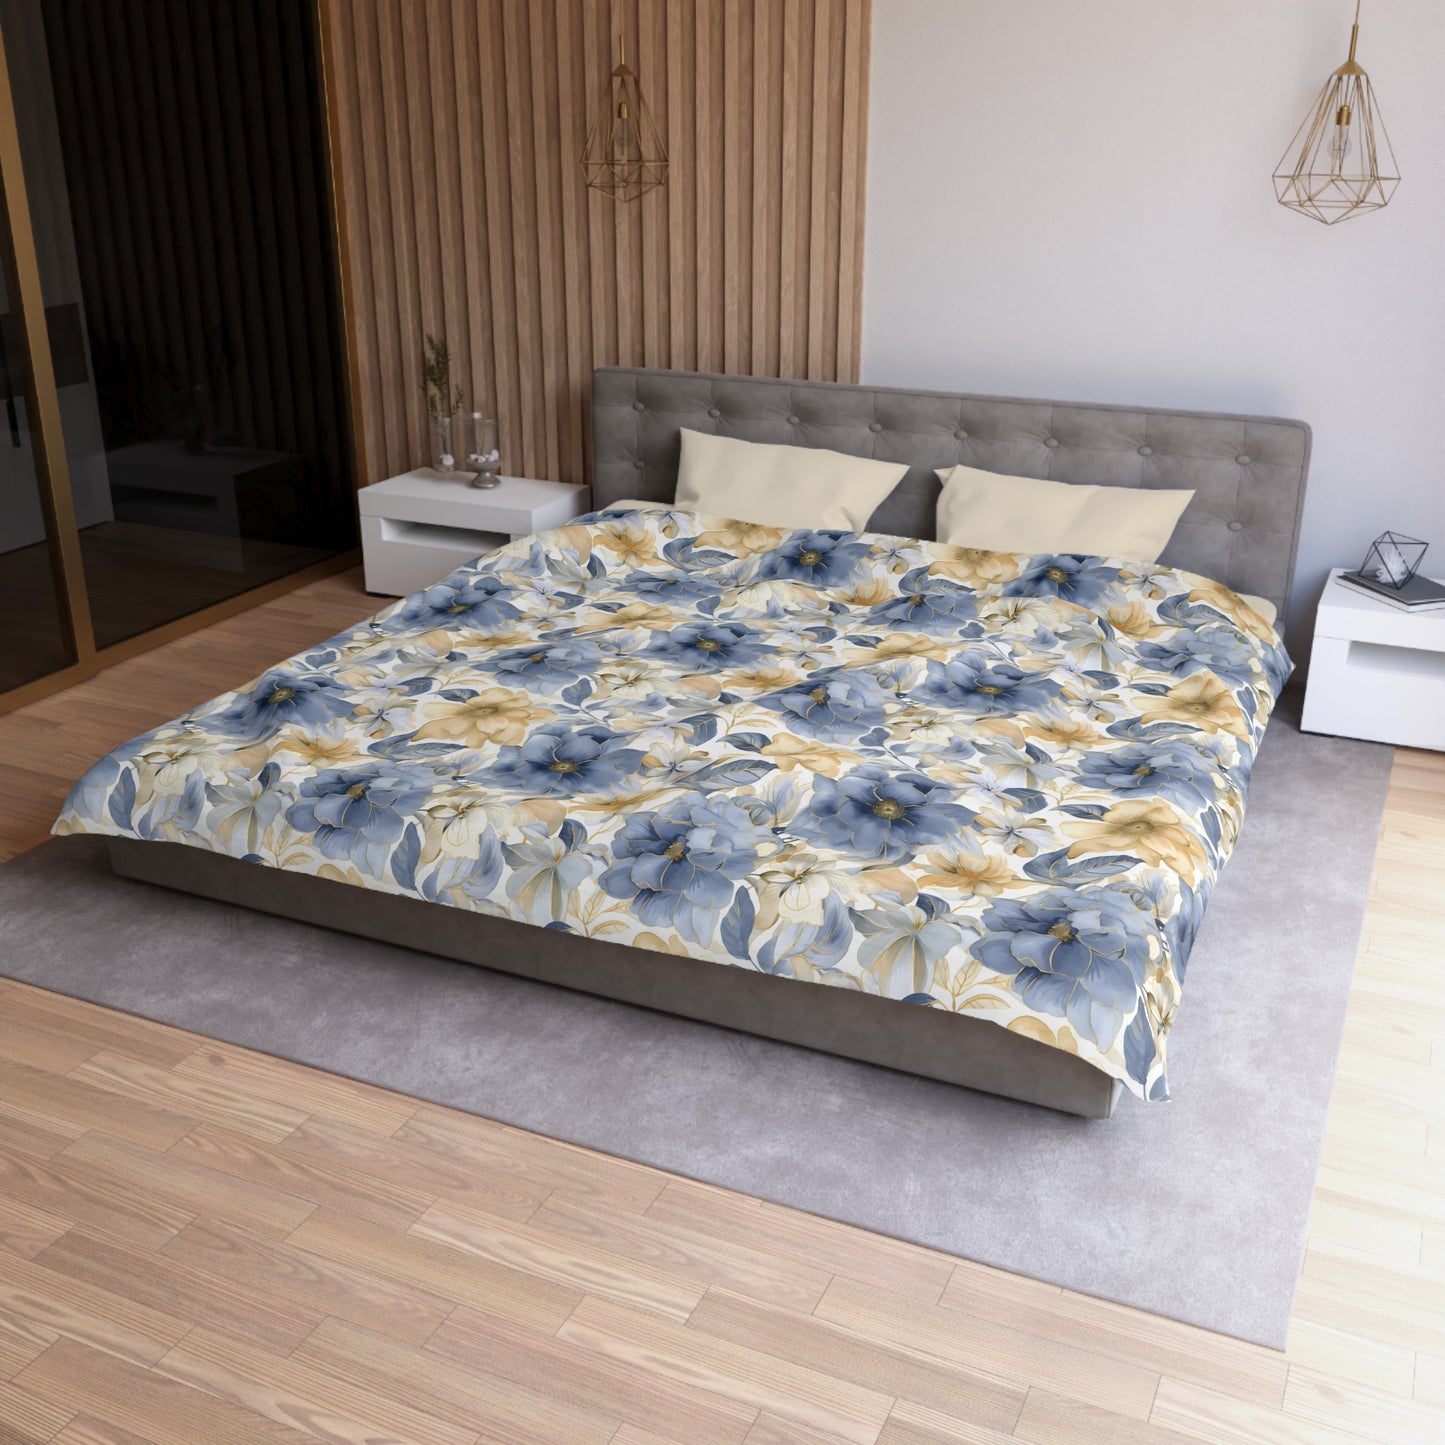 Blue And Gold Floral Duvet Cover